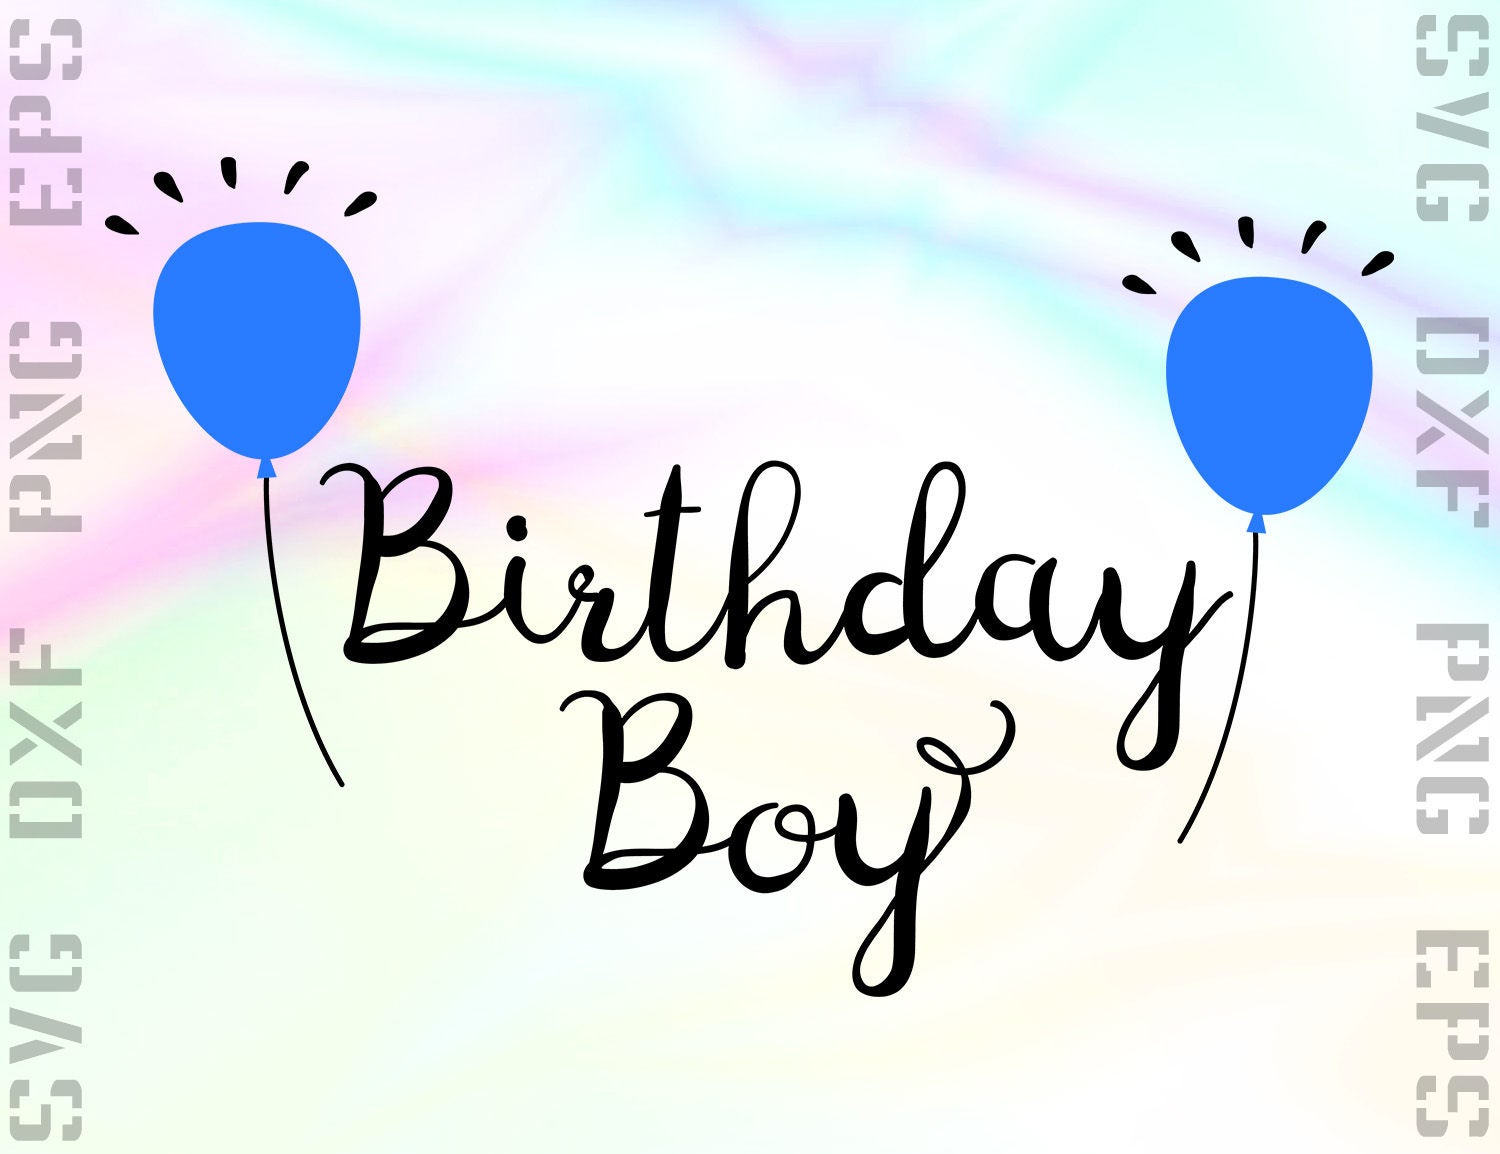 Birthday Boy SVG Saying Cut File for Cricut or Silhouette and